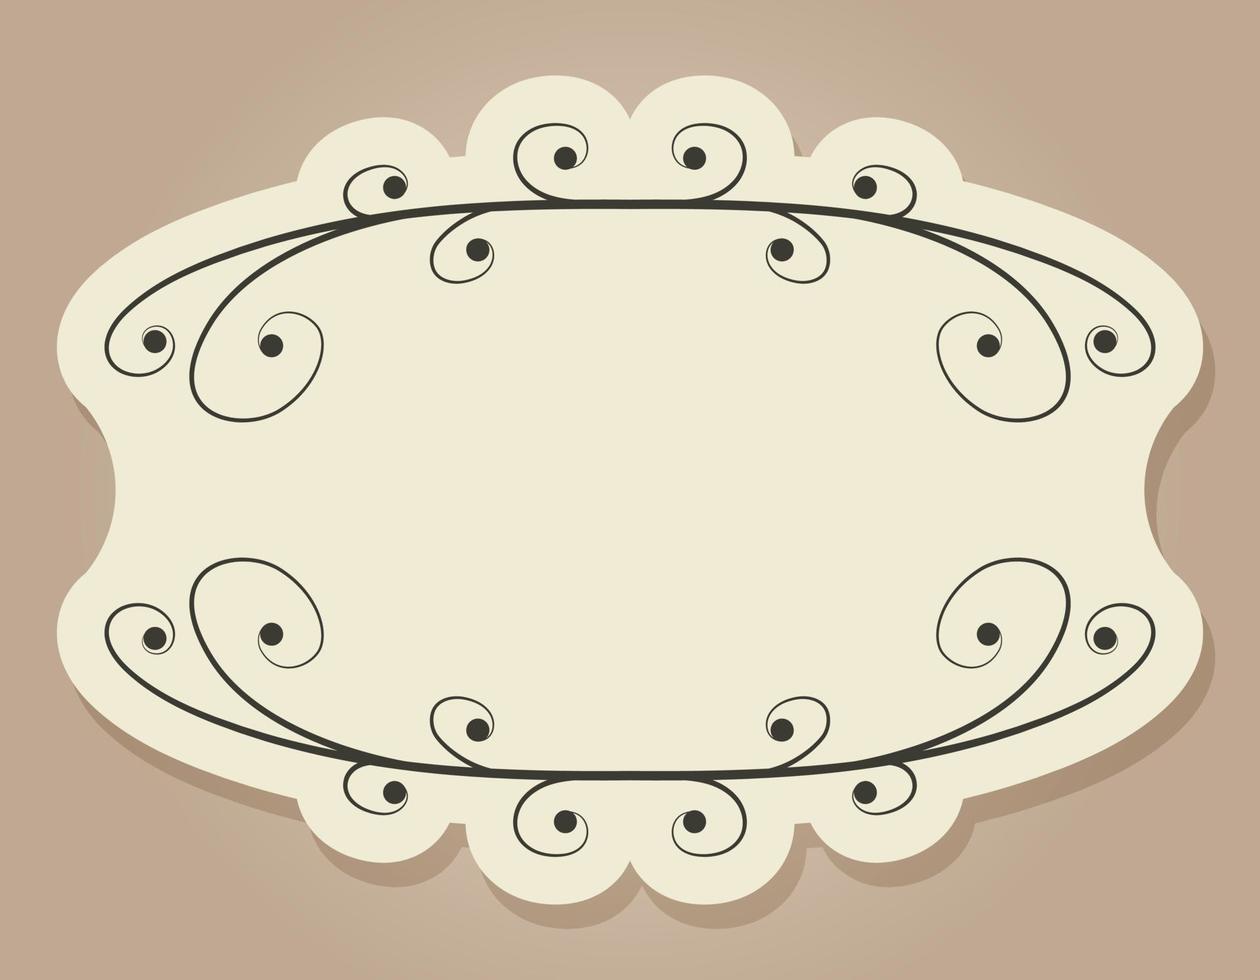 Vintage old frame or label with elegant swirls ornament. Vector isolated banner or template.